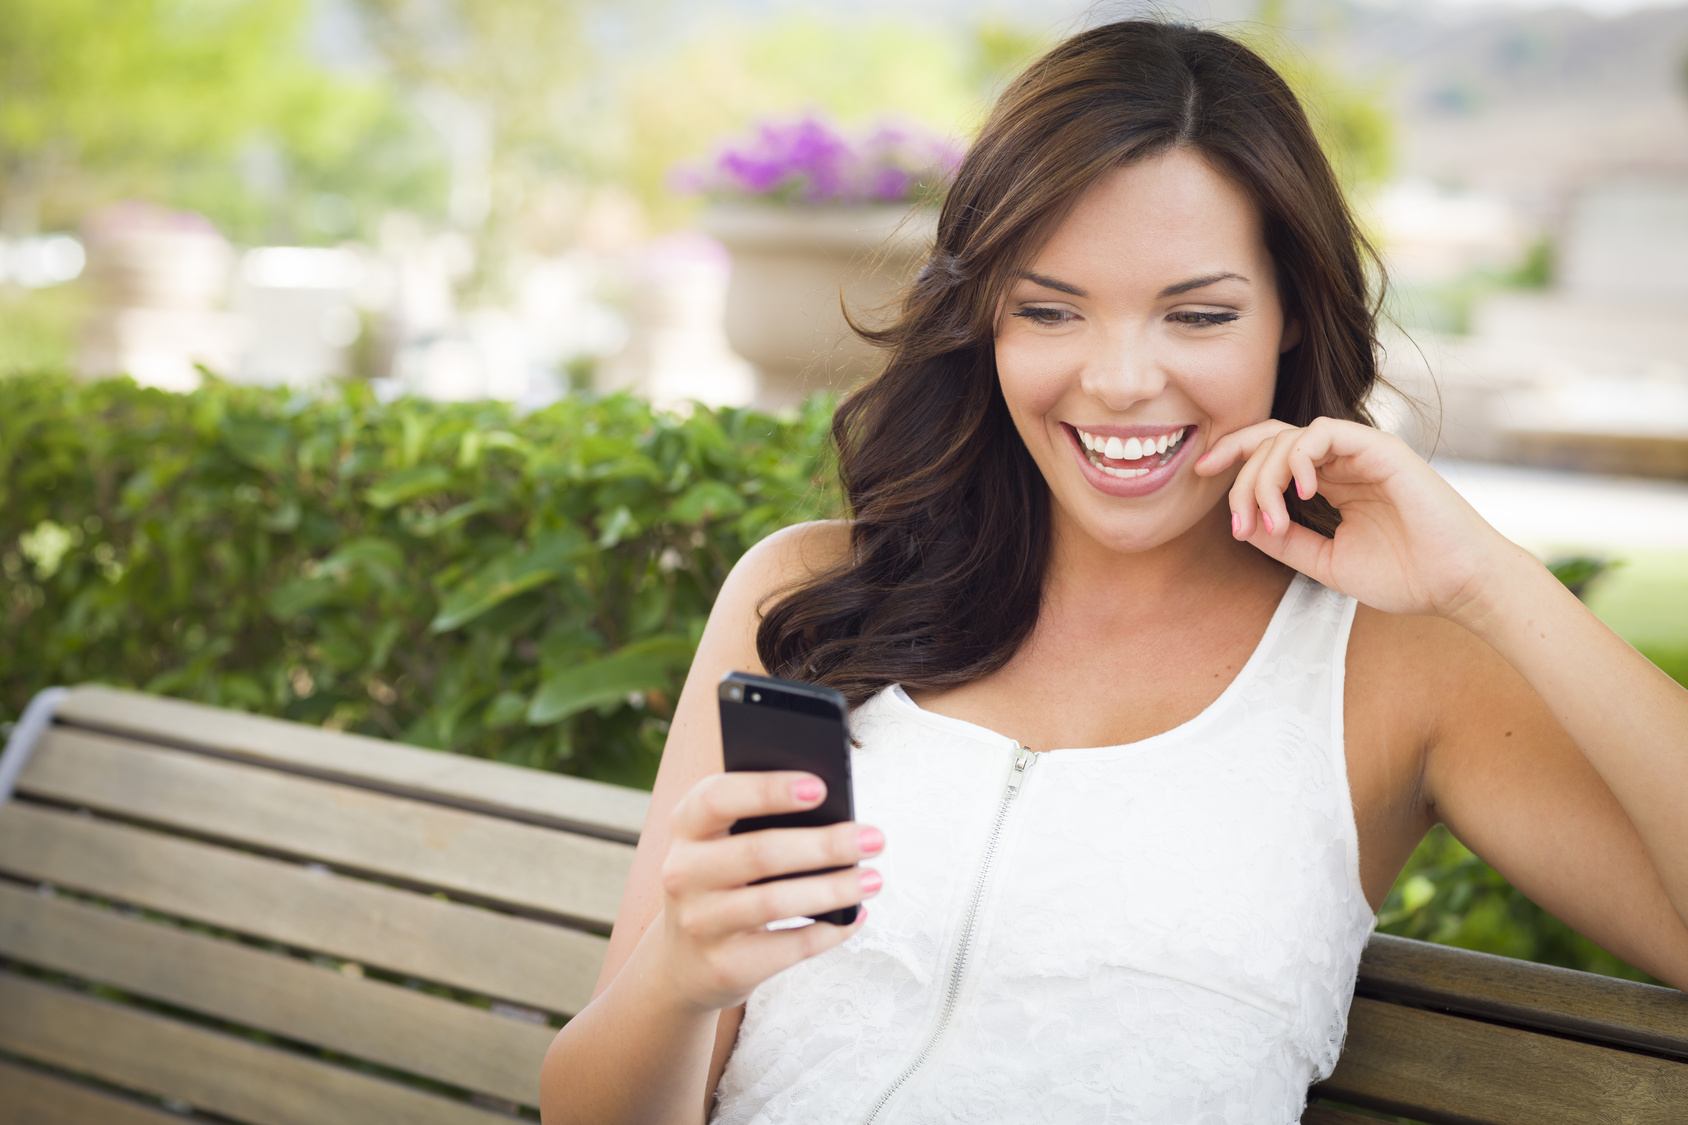 Attractive Smiling Young Adult Female Texting on Cell Phone Outdoors on a Bench